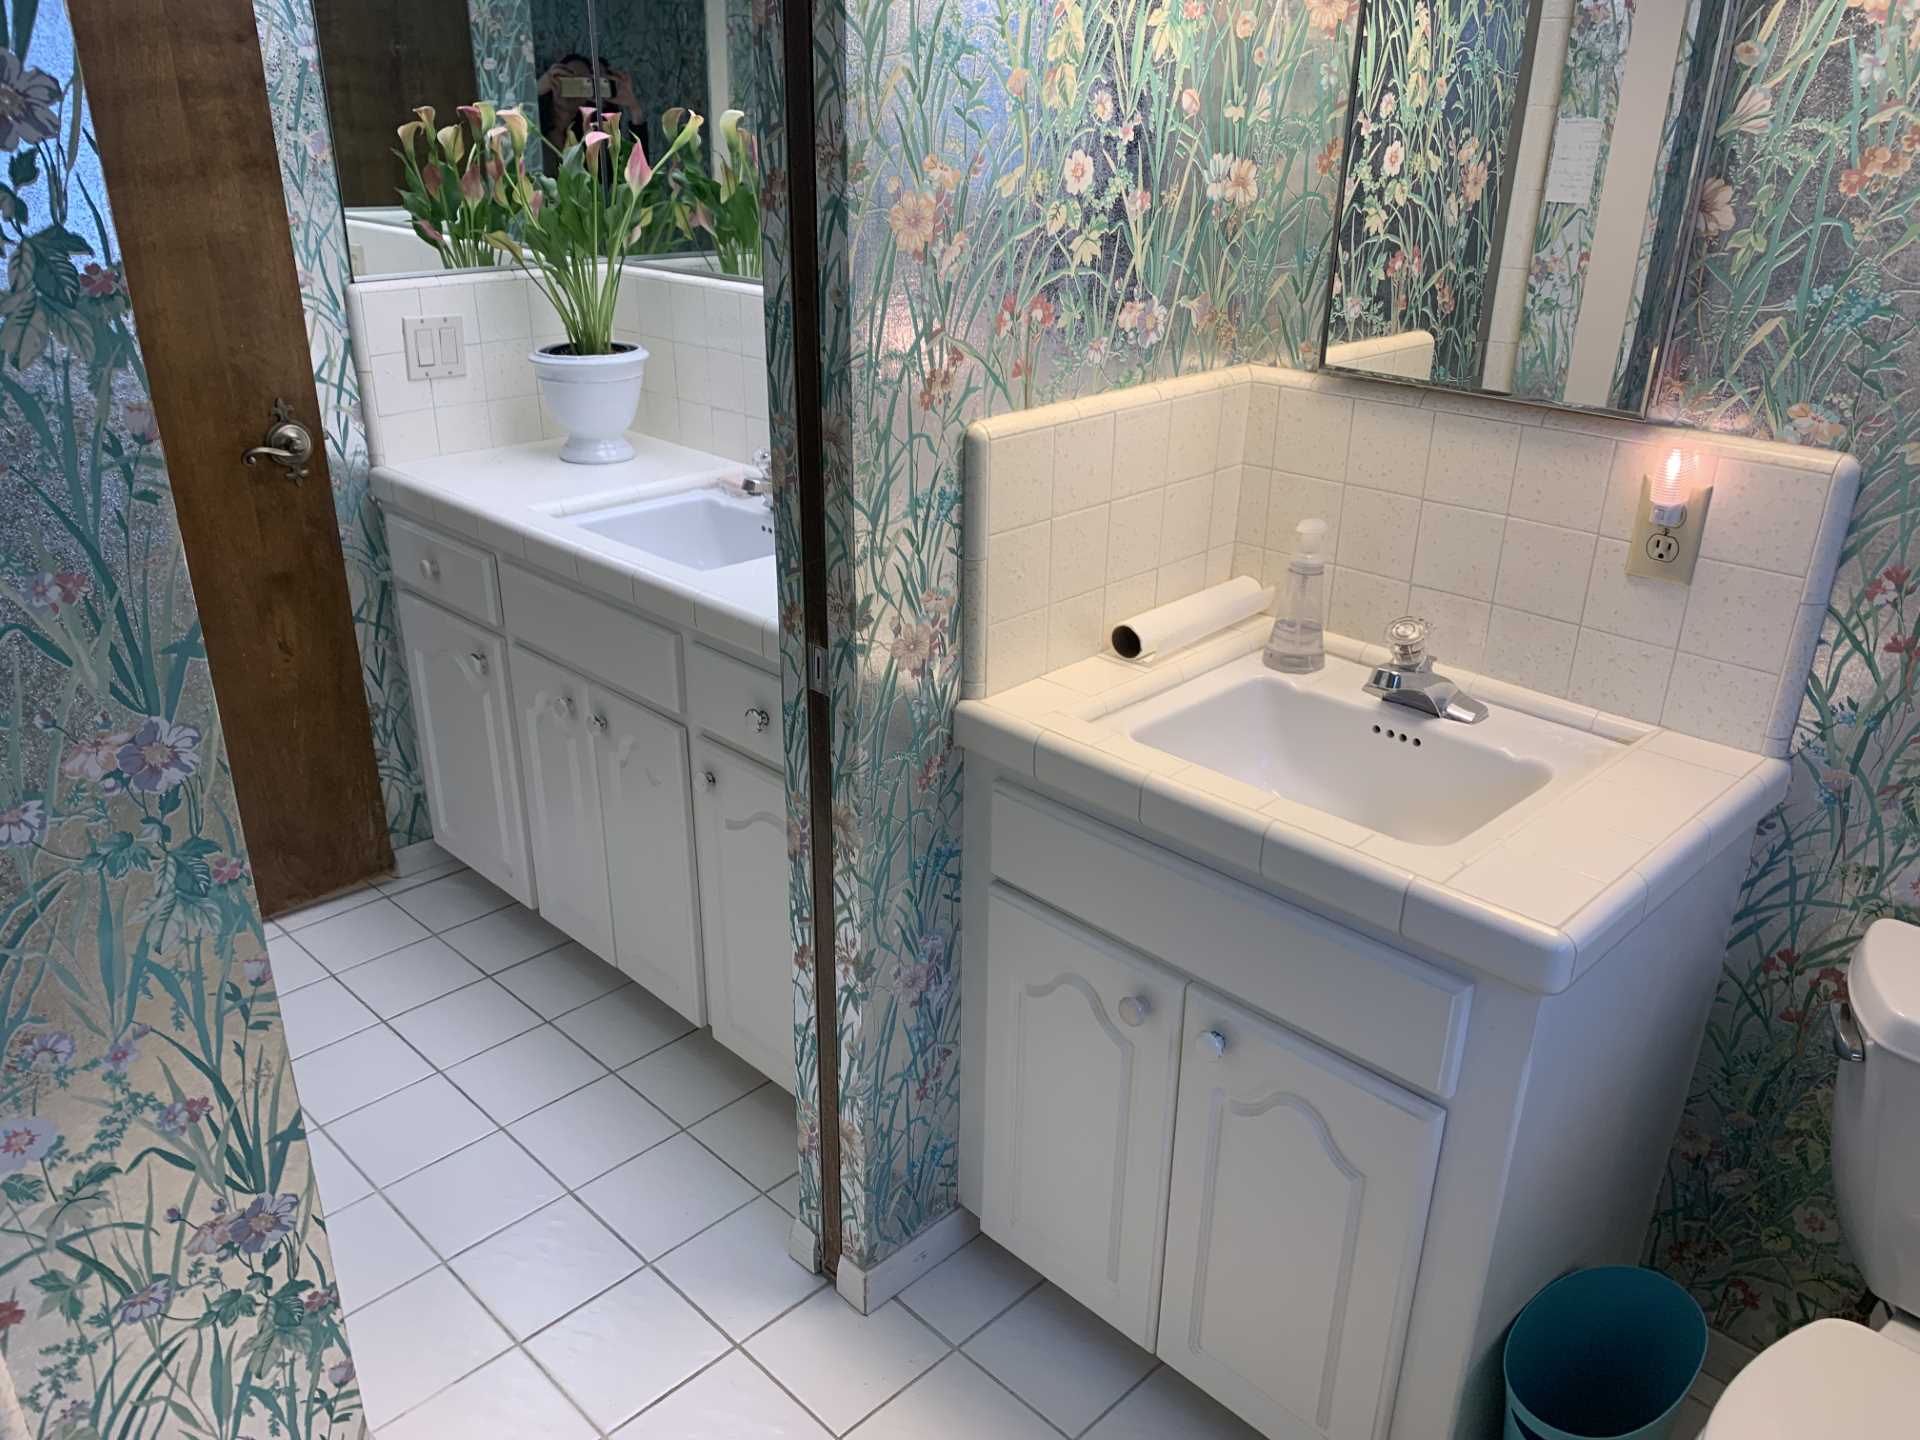 Metallic wallpaper with flowers covered the walls and ceiling in this 'before' bathroom. Also included are vanities that are separated by a wall, both of which have tiled countertops.